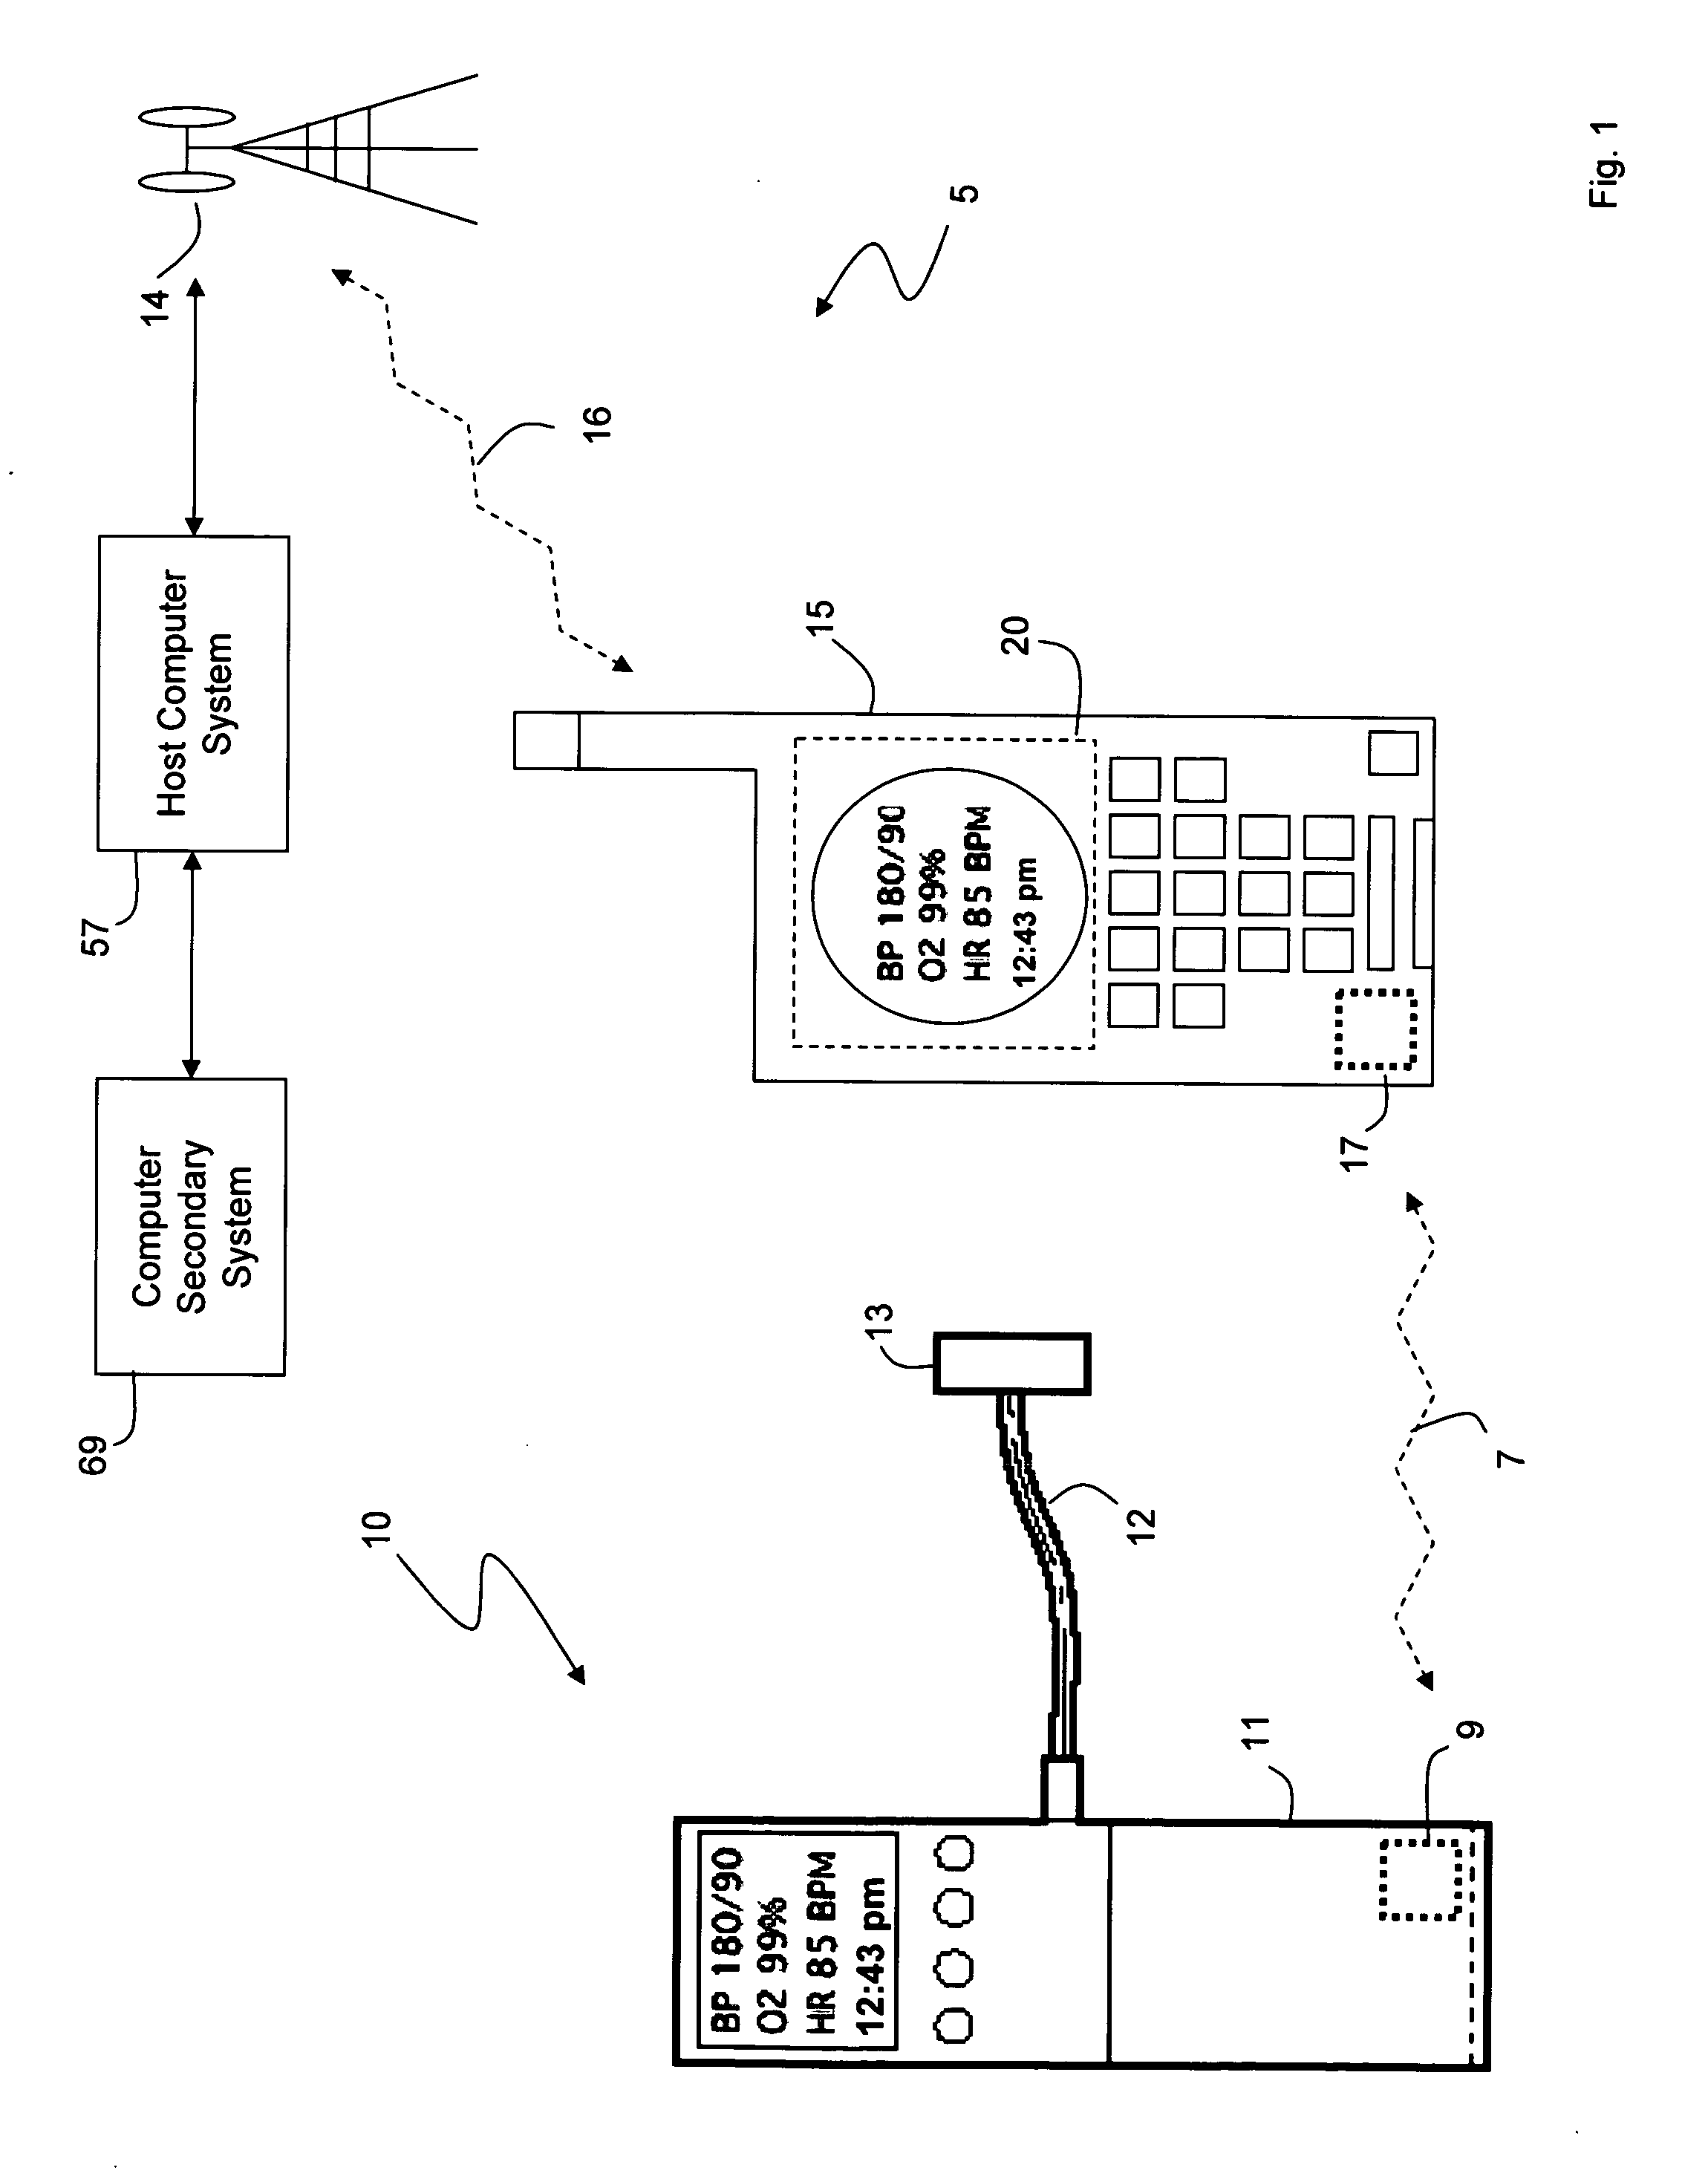 Cuffless blood-pressure monitor and accompanying wireless mobile device